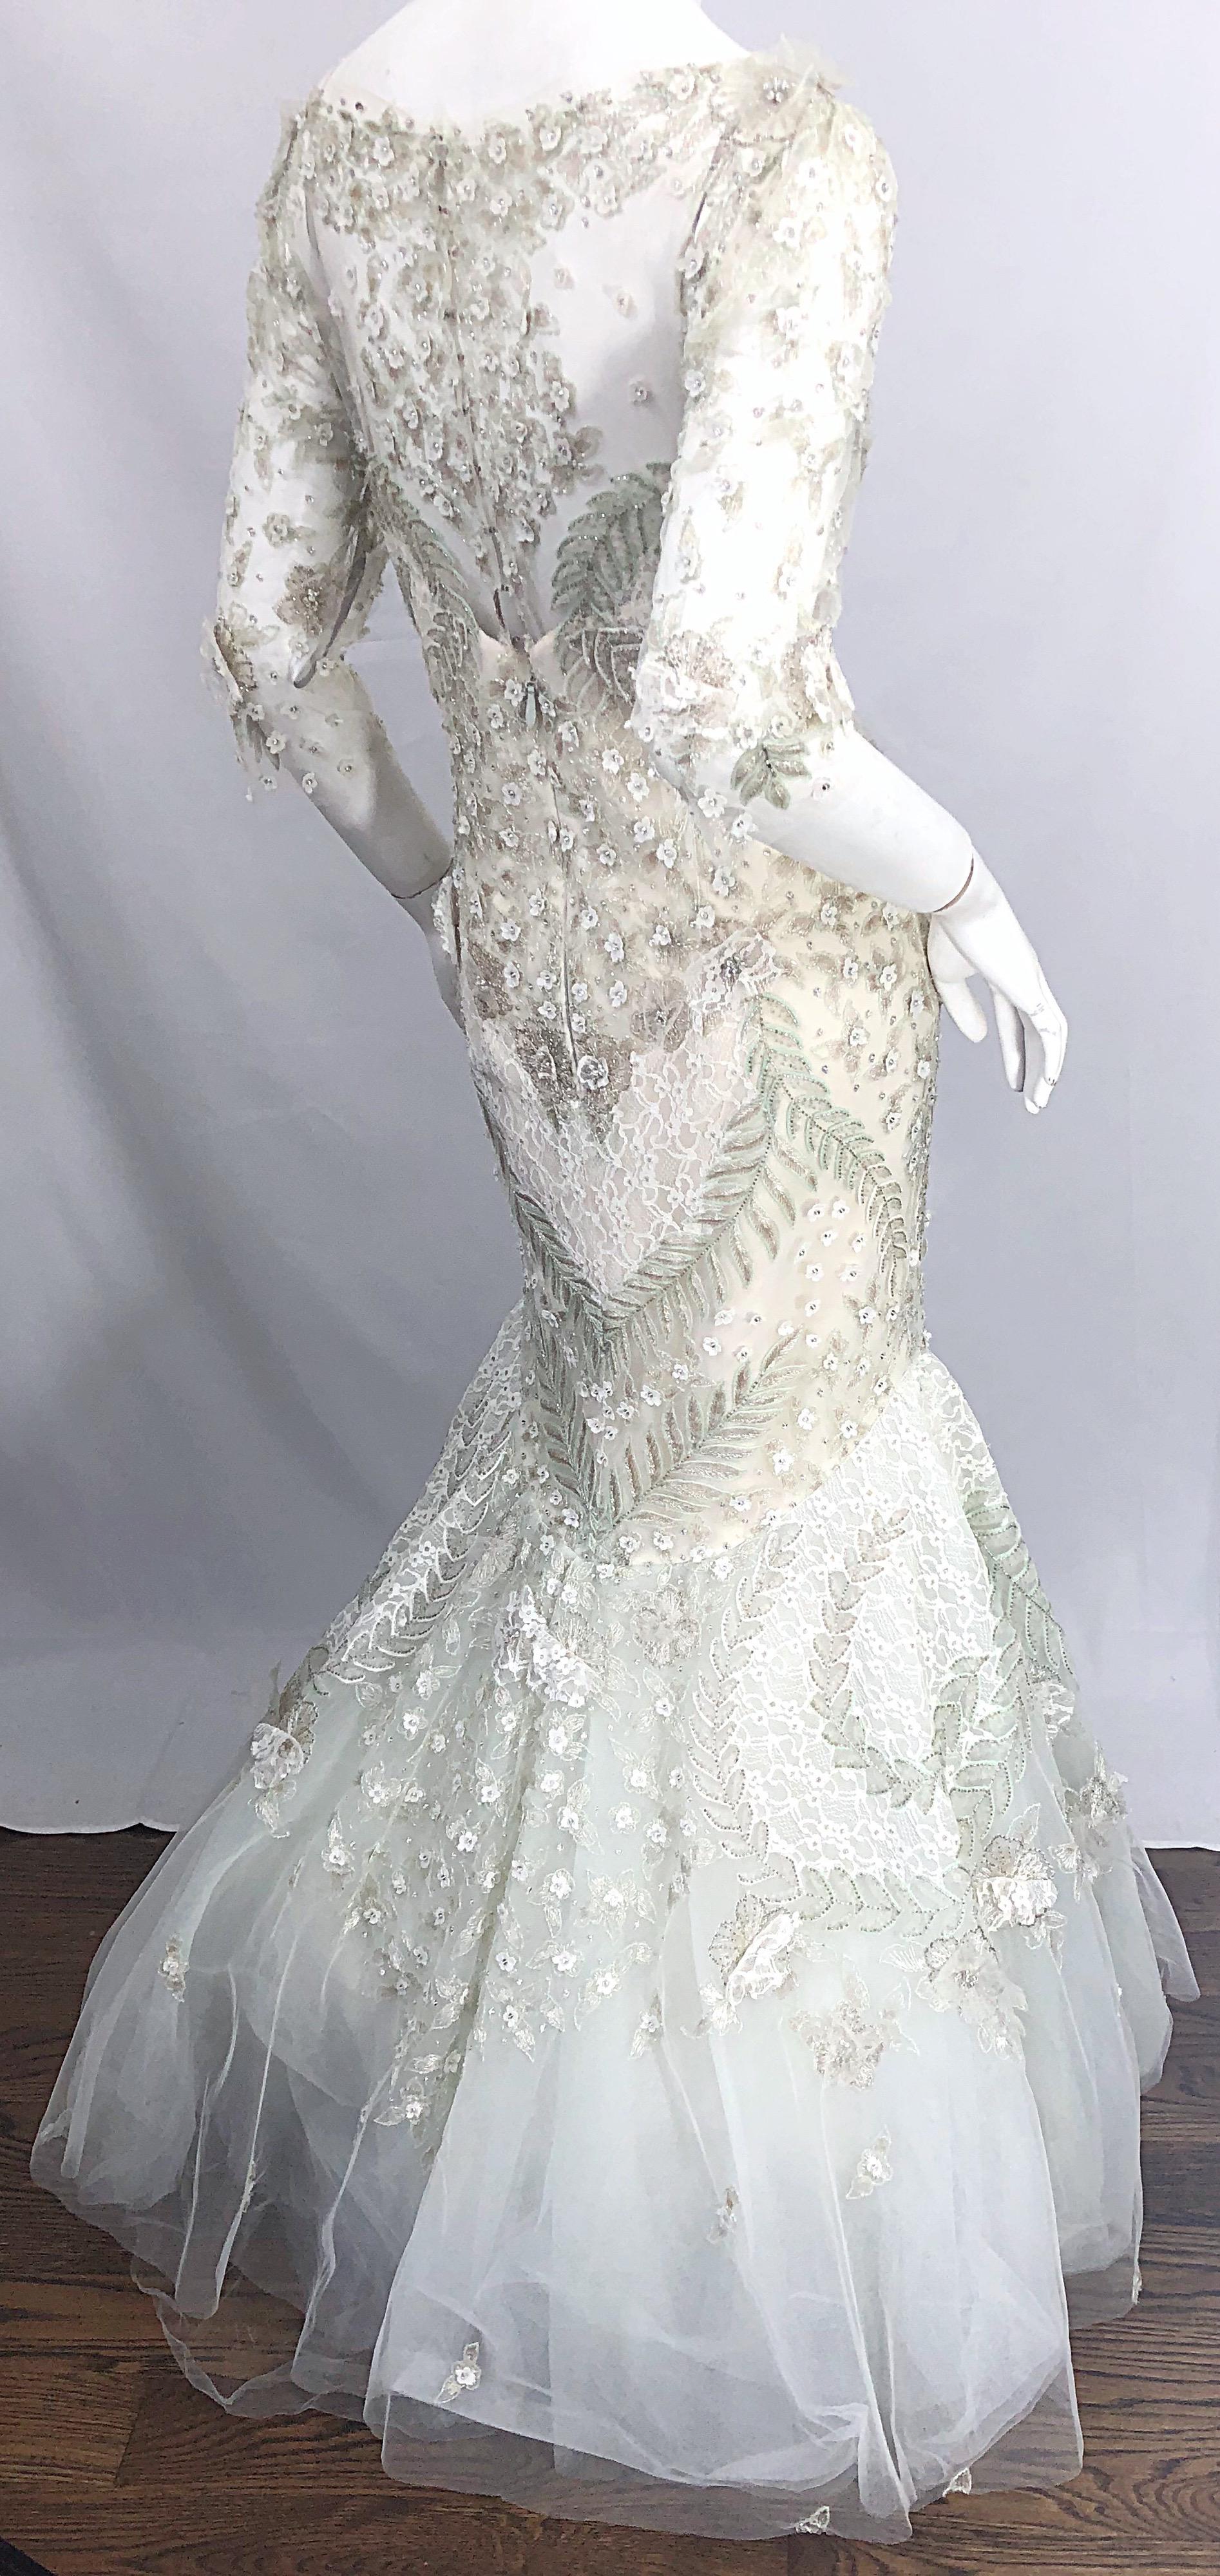 Monique Lhuillier Size 14 Mint Green Ivory Beaded Sequined Mermaid Gown Dress For Sale 1